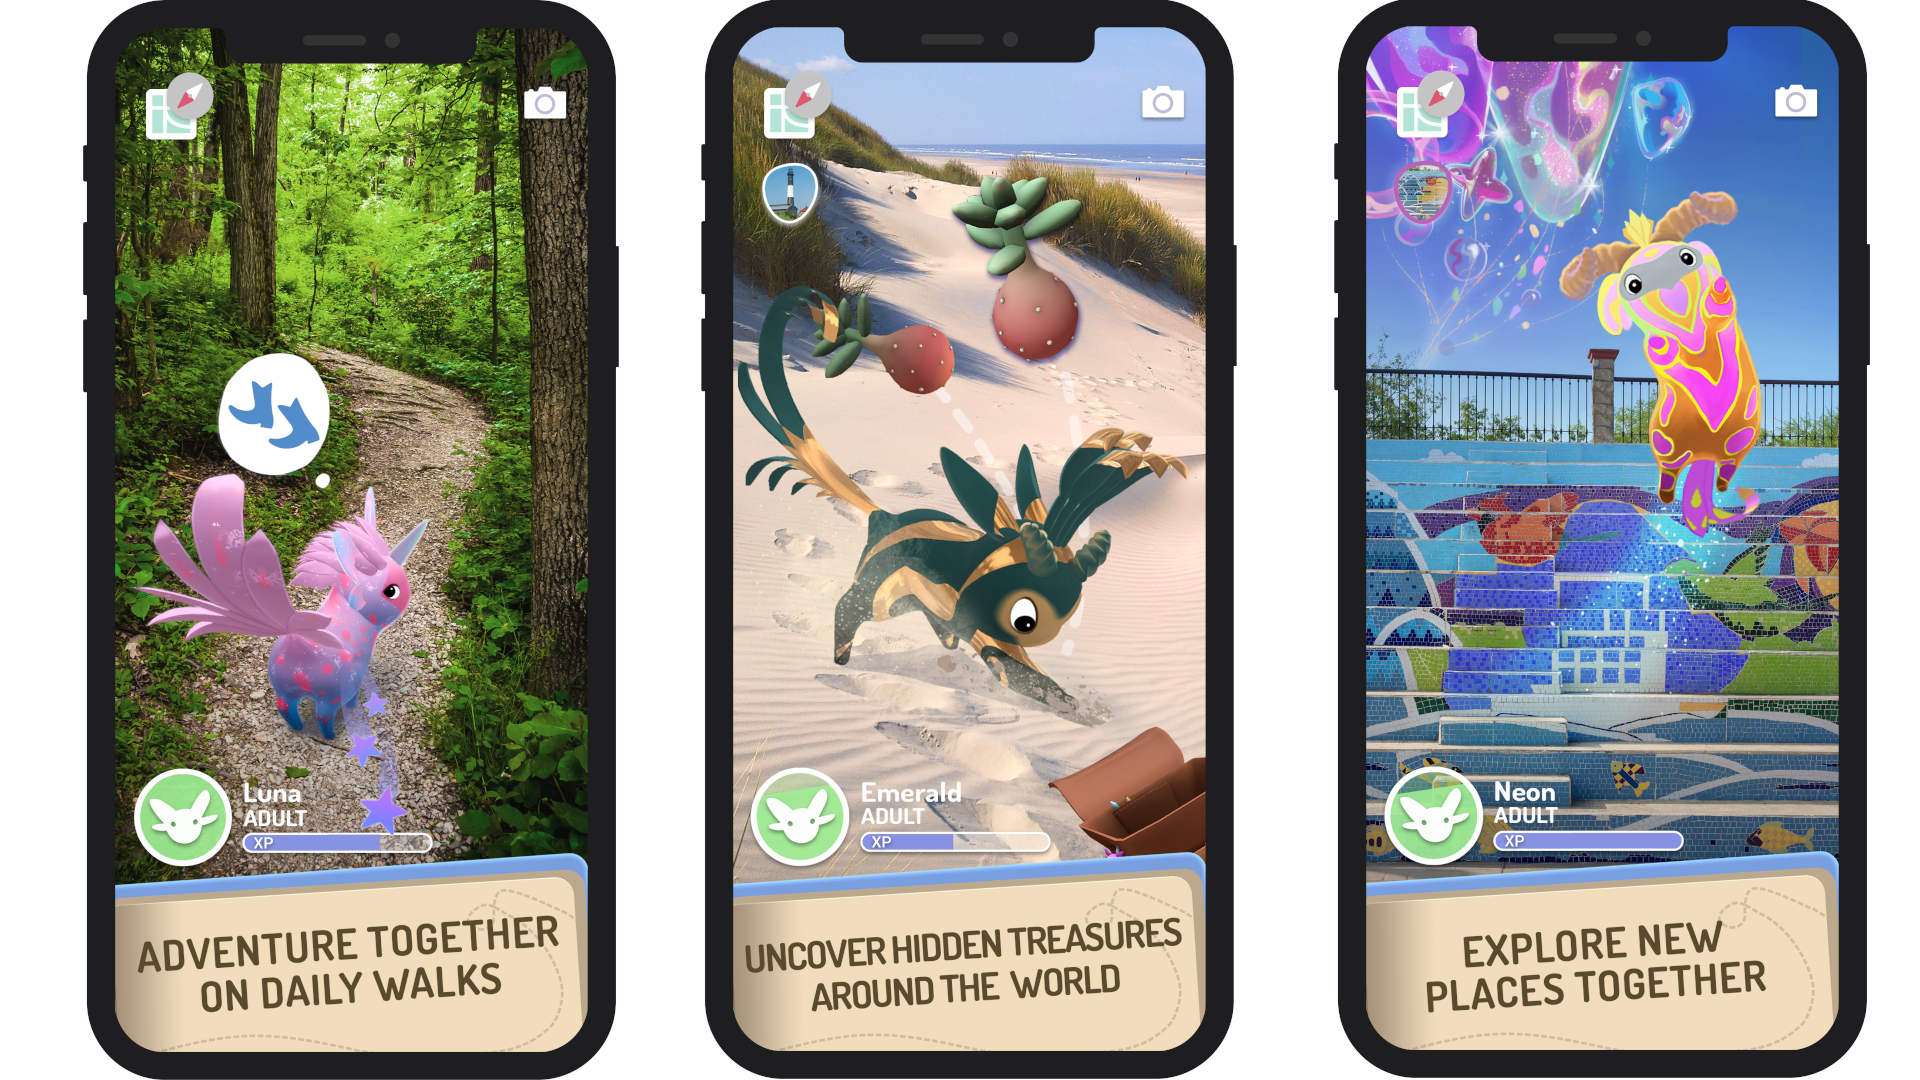 Mobile screenshots showing player's doing activities with Peridots including daily walks, digging for treasure, and exploring new places